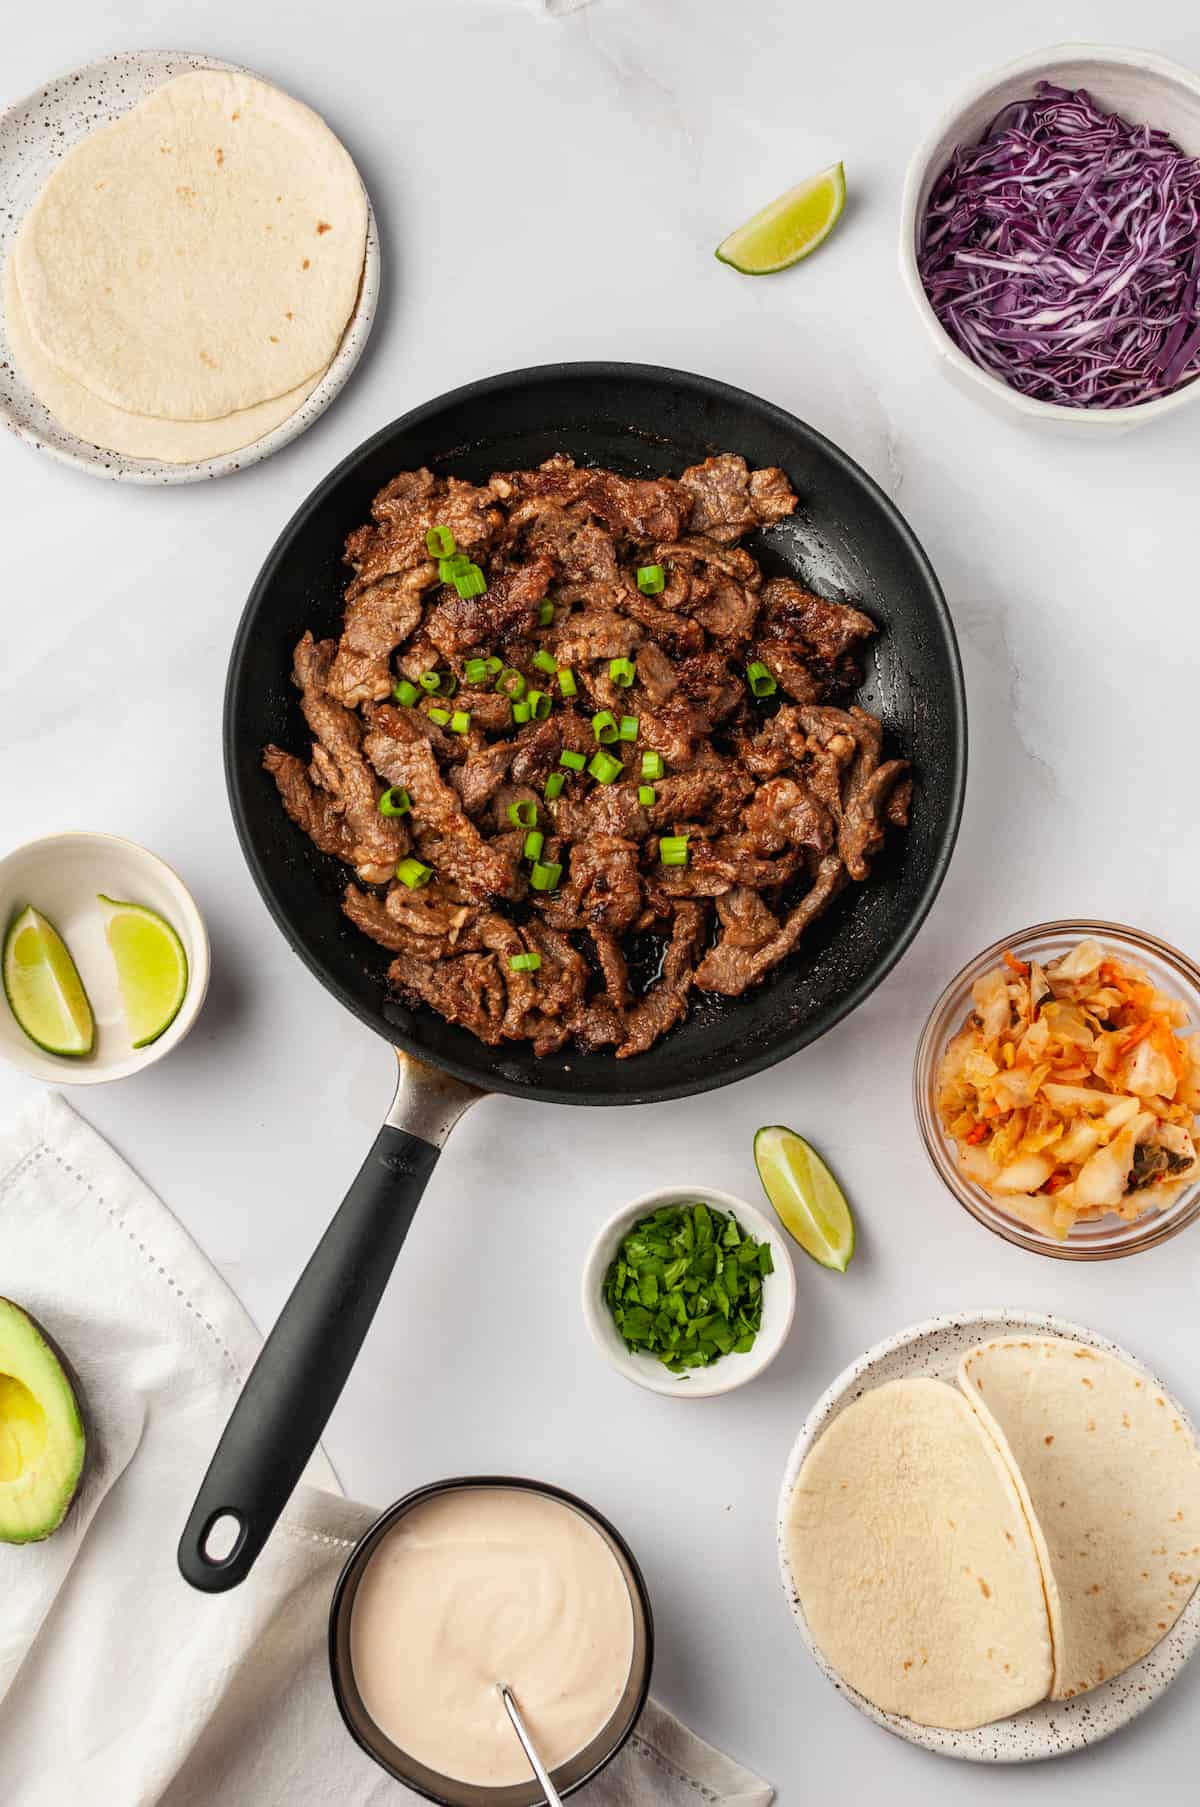 Overhead view of bulgogi in skillet with other taco components